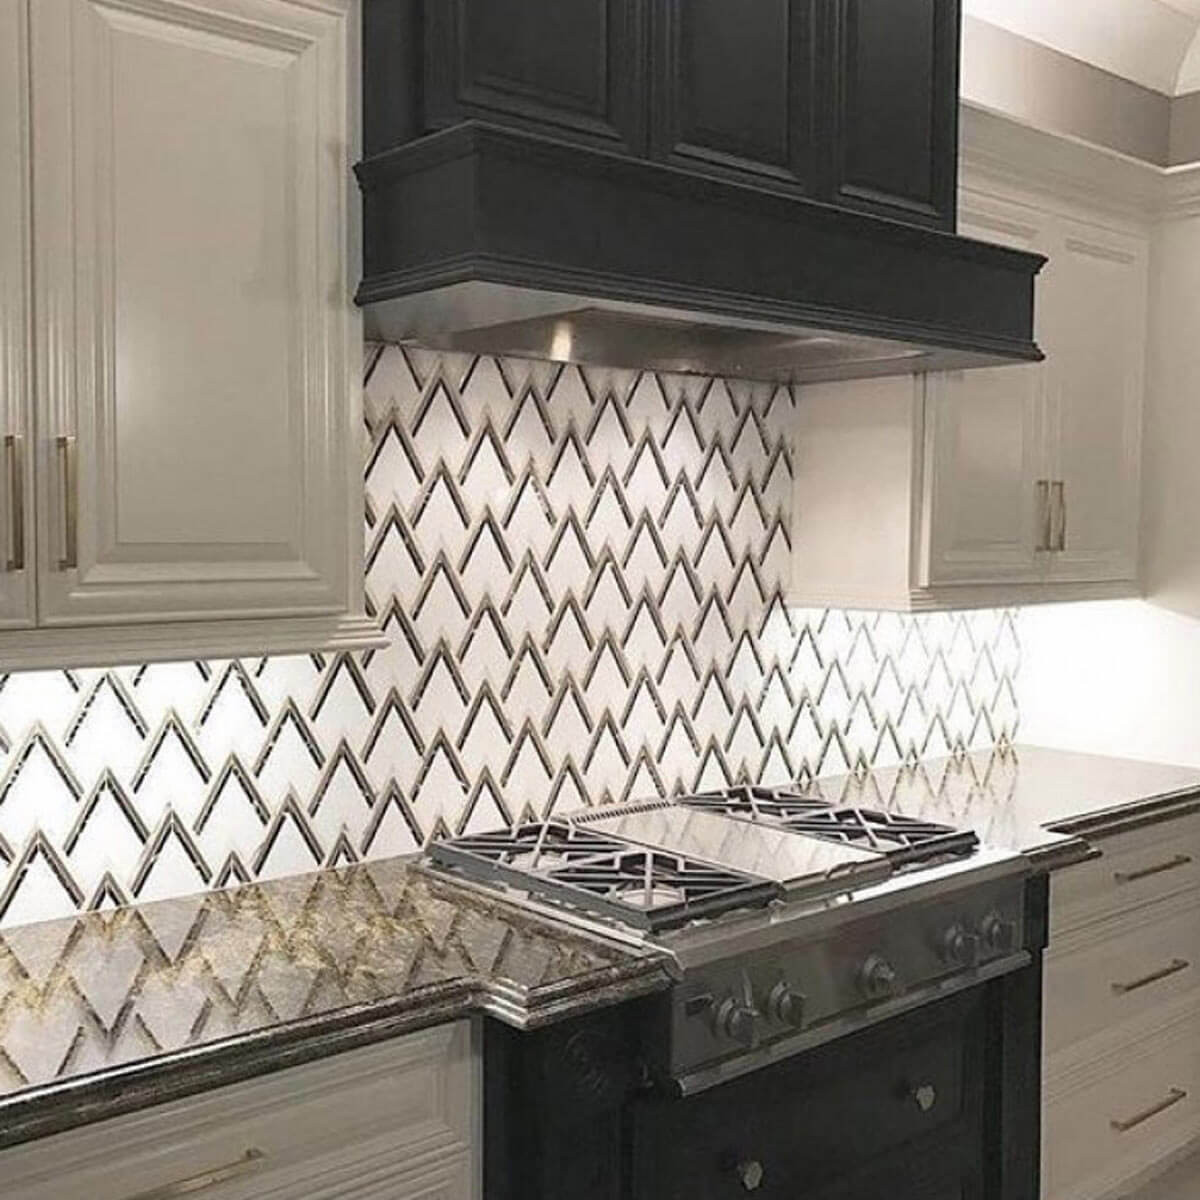 Art Deco Kitchen Tile
 14 Showstopping Tile Backsplash Ideas To Suit Any Style